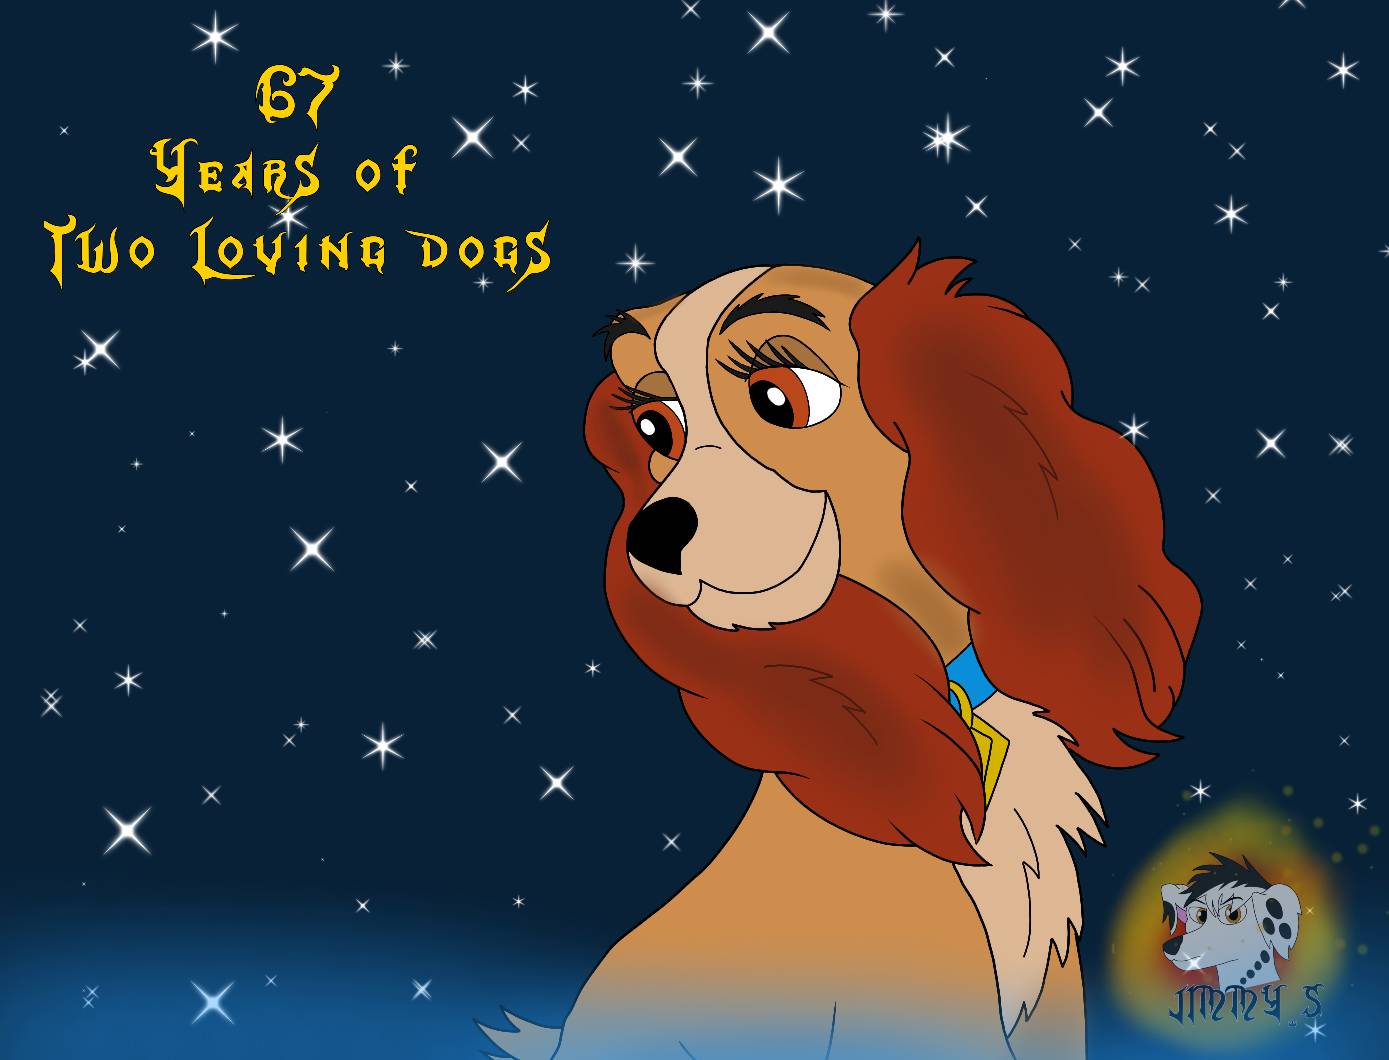 Lady And The Tramp What Dreams May Come by Gloverman23 on DeviantArt